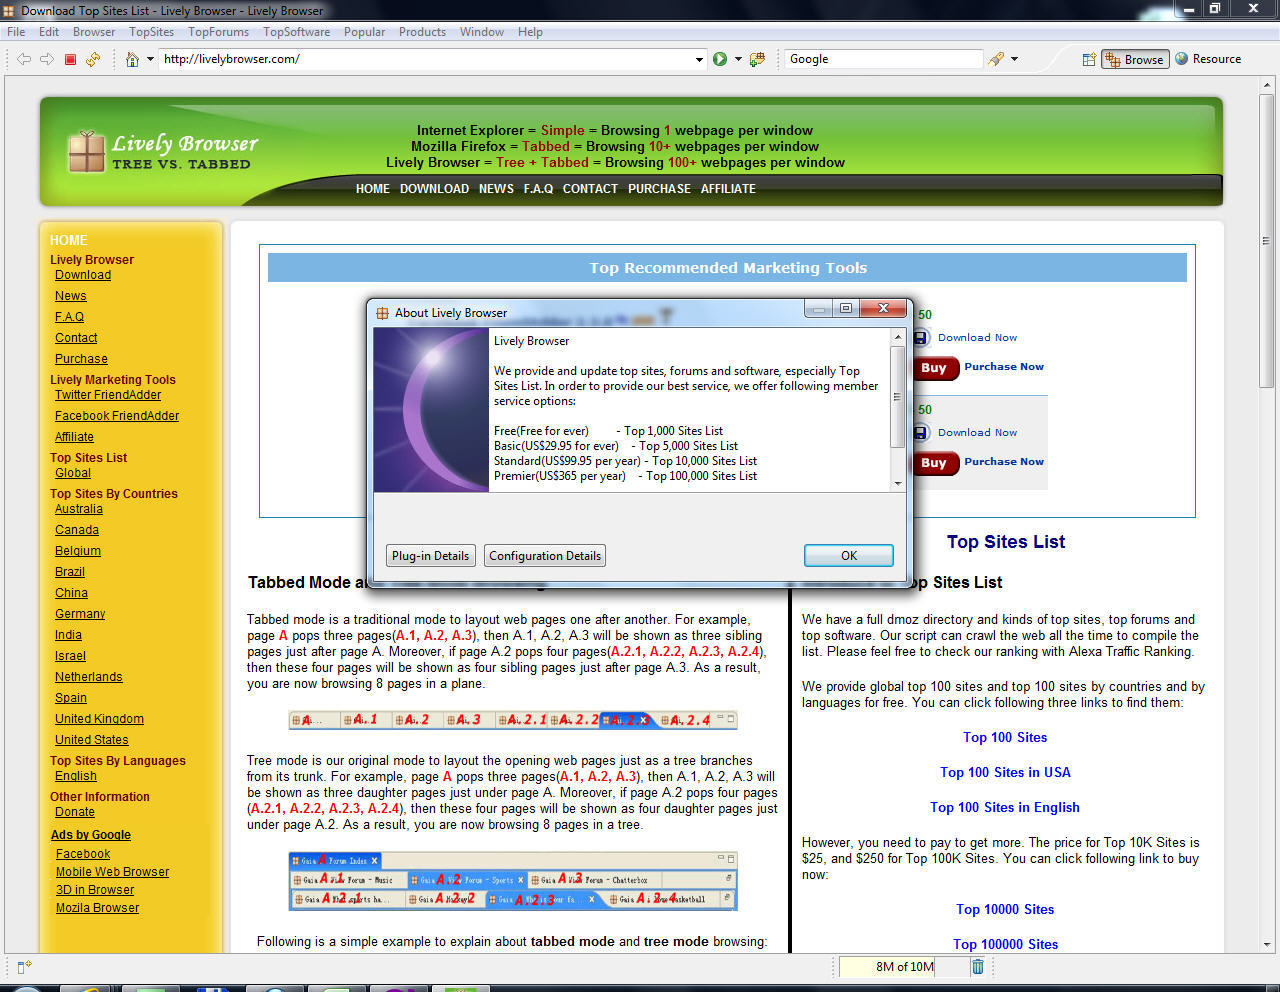 Lively Browser 4.4 : Main window